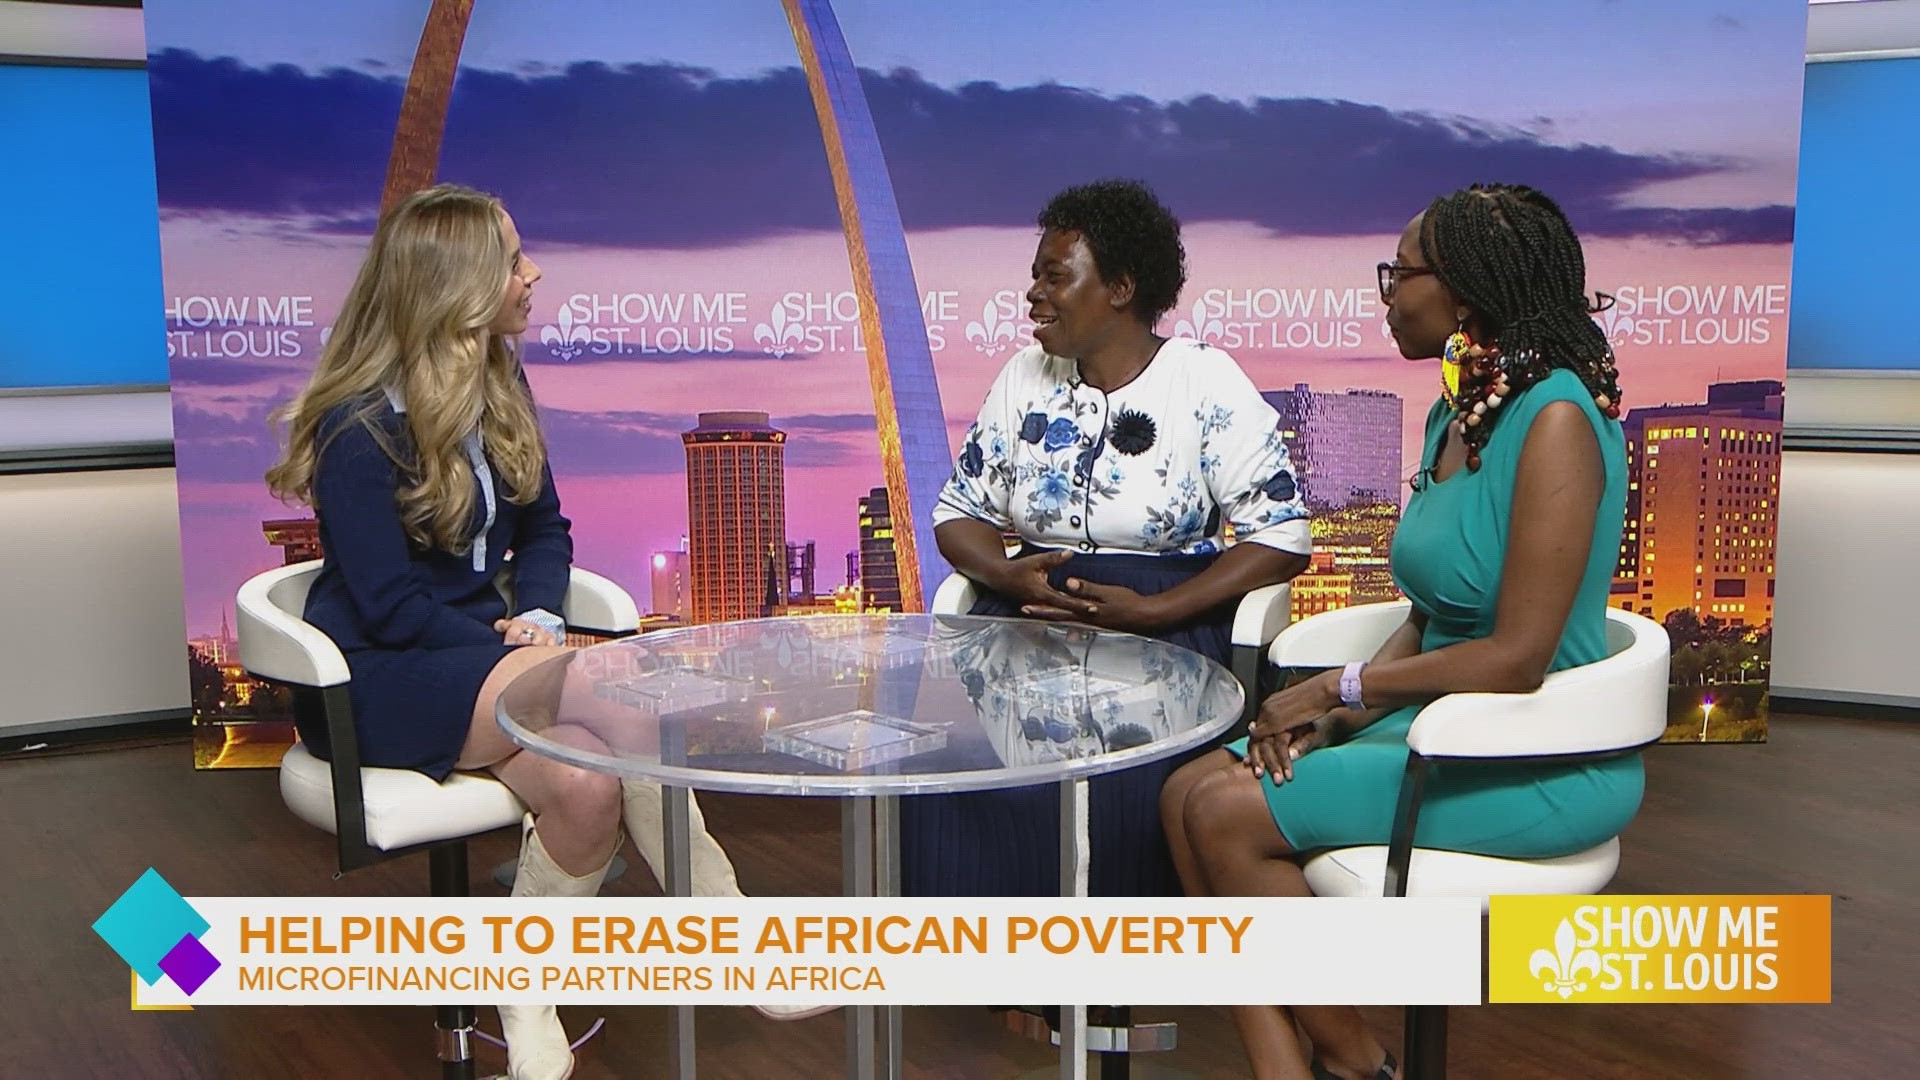 The local nonprofit is helping to eradicate African poverty. You can support them by attending their gala on 4/13.